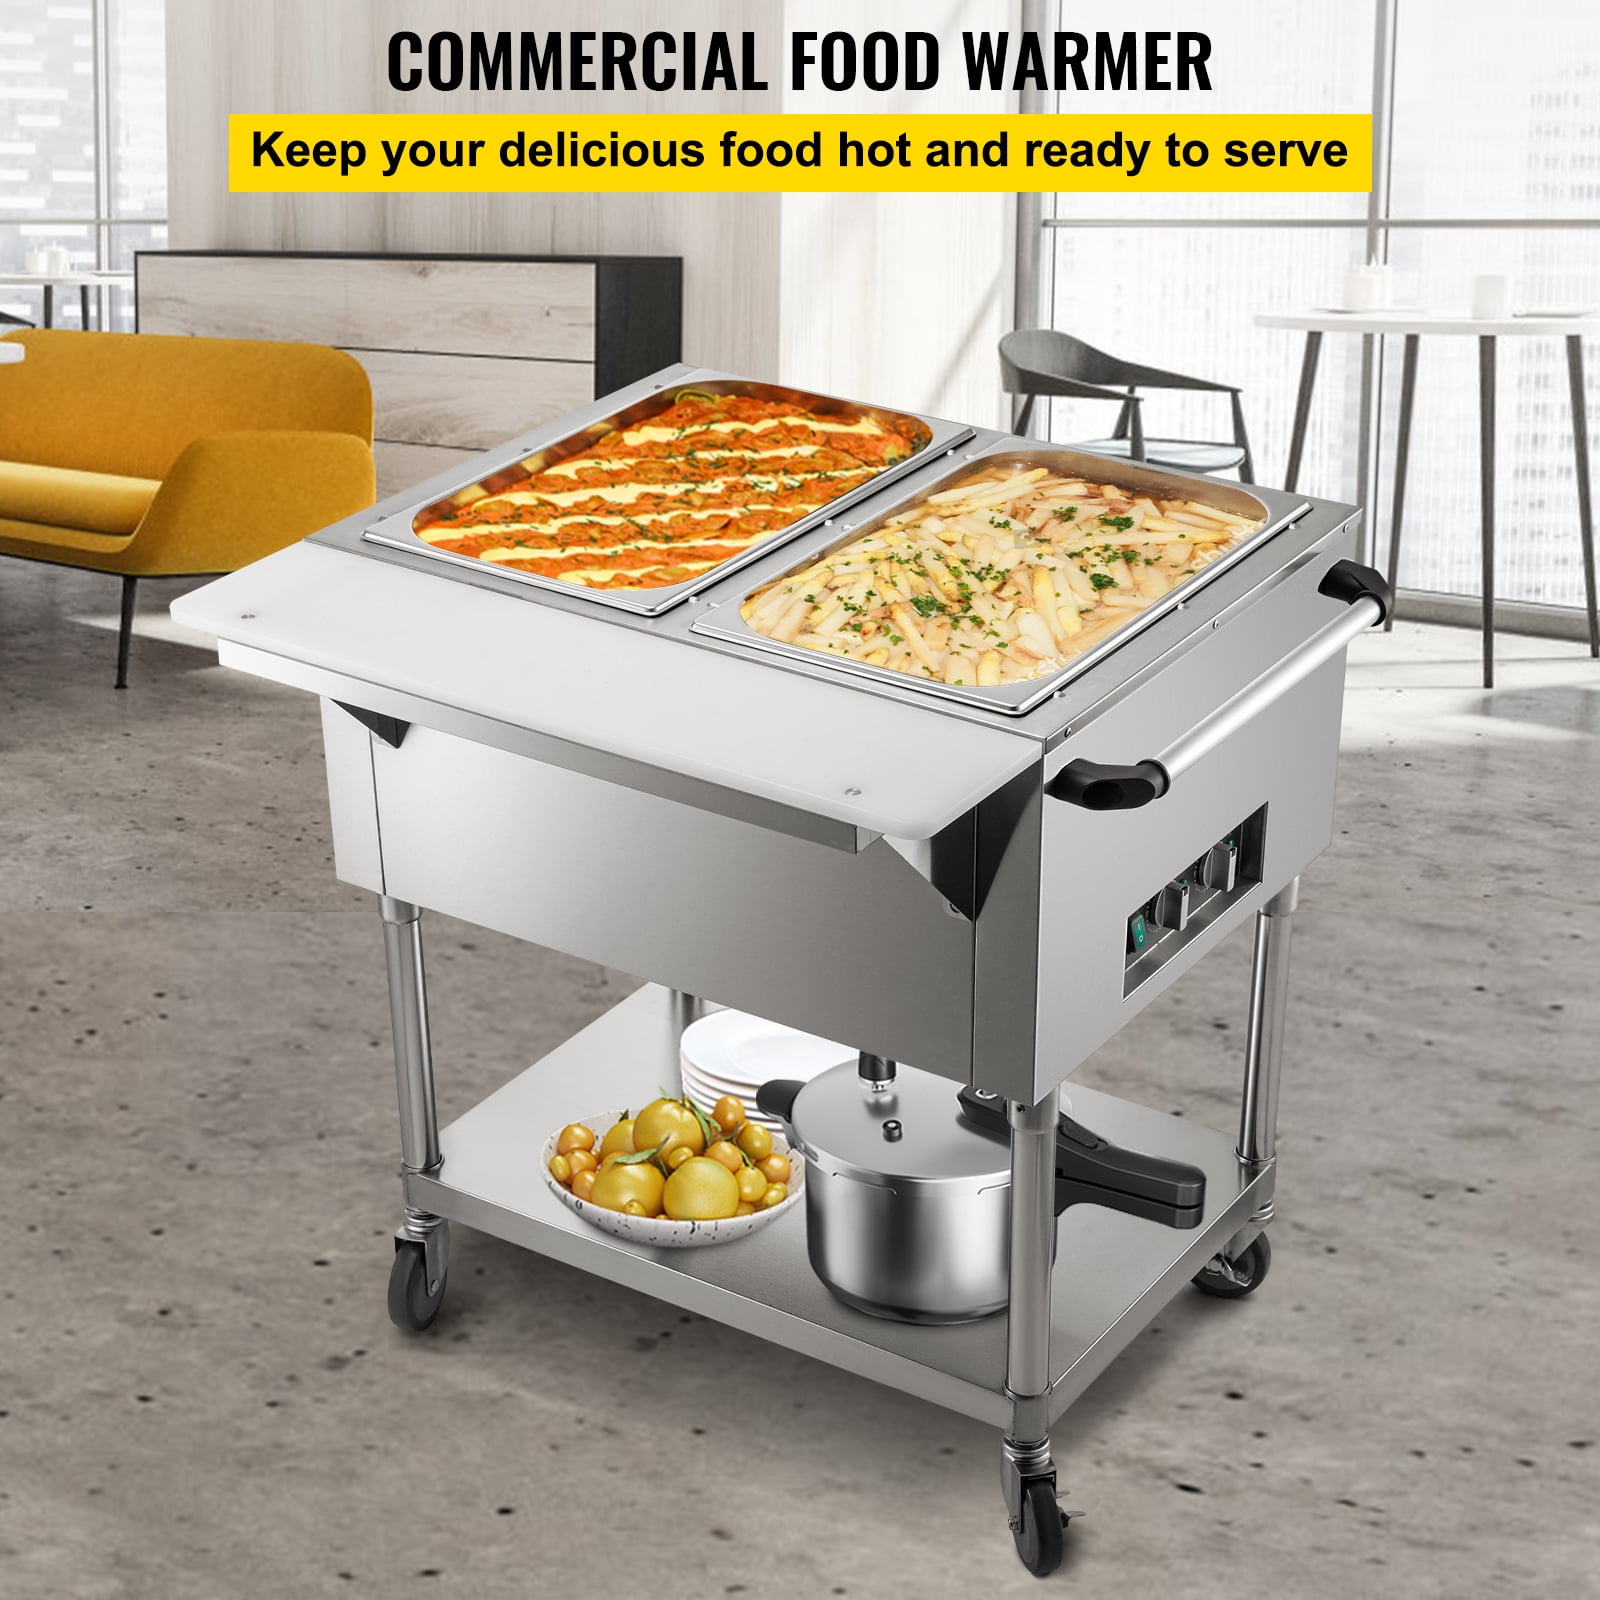 VEVOR Commercial Soup Warmer 22.2 qt. Capacity, 800W Electric Food